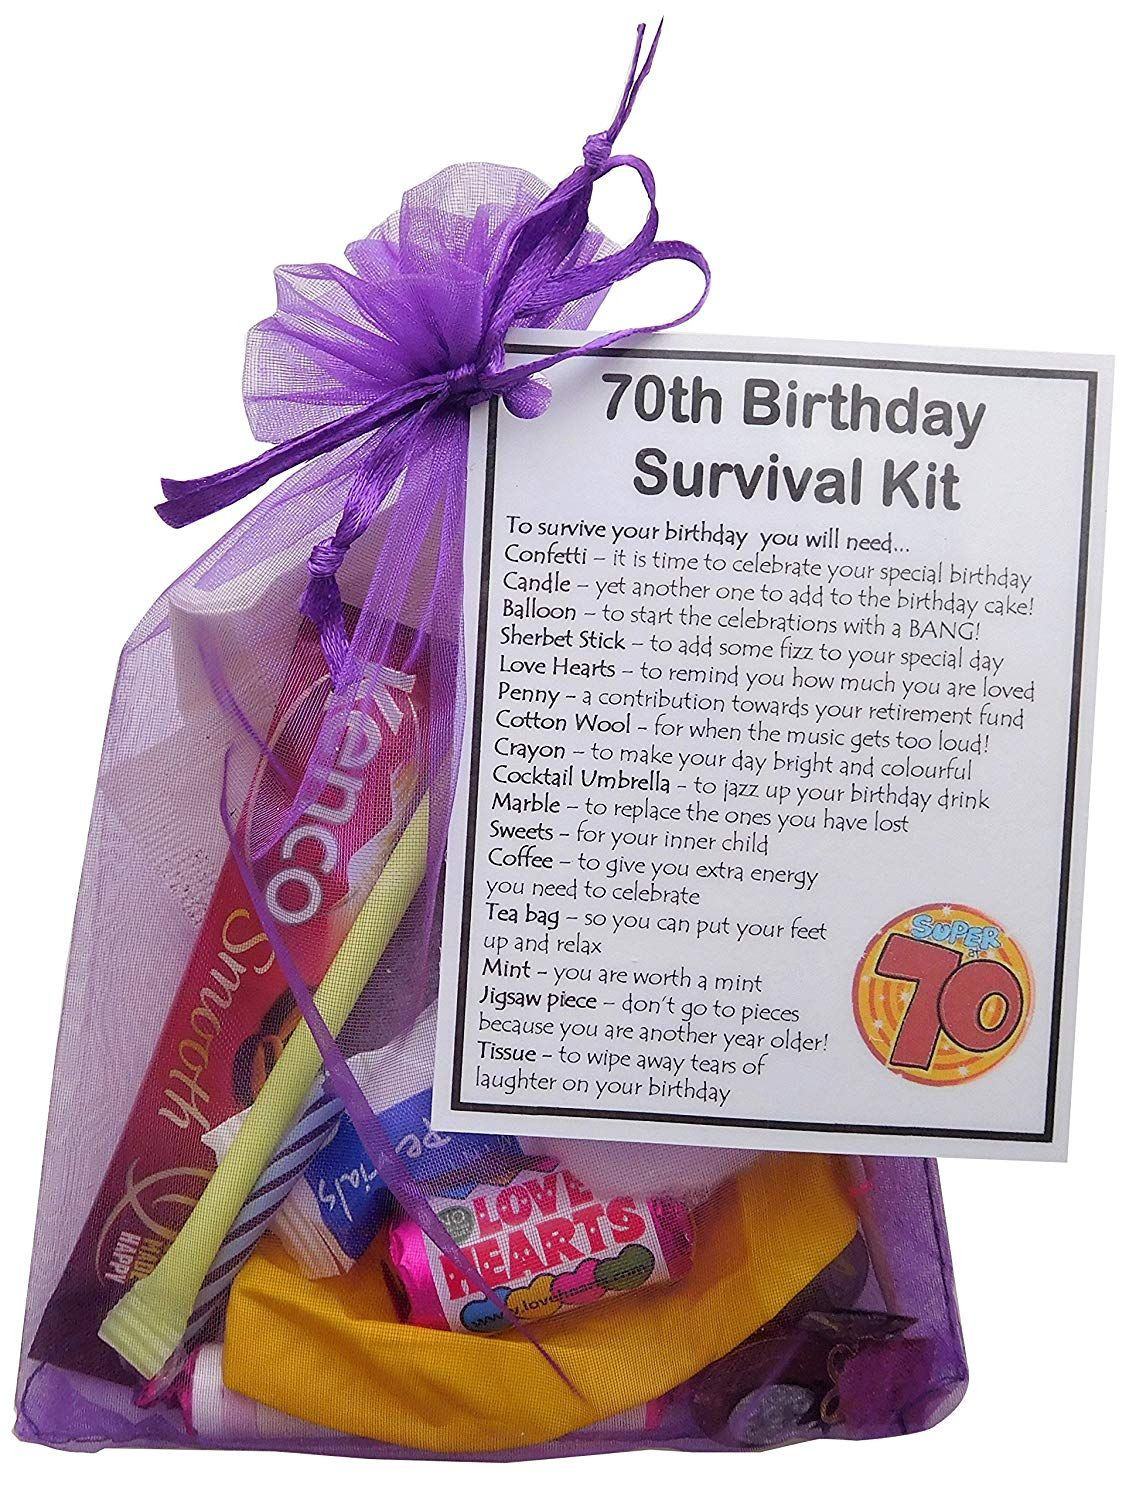 Gift Ideas For 70Th Birthday
 Related image